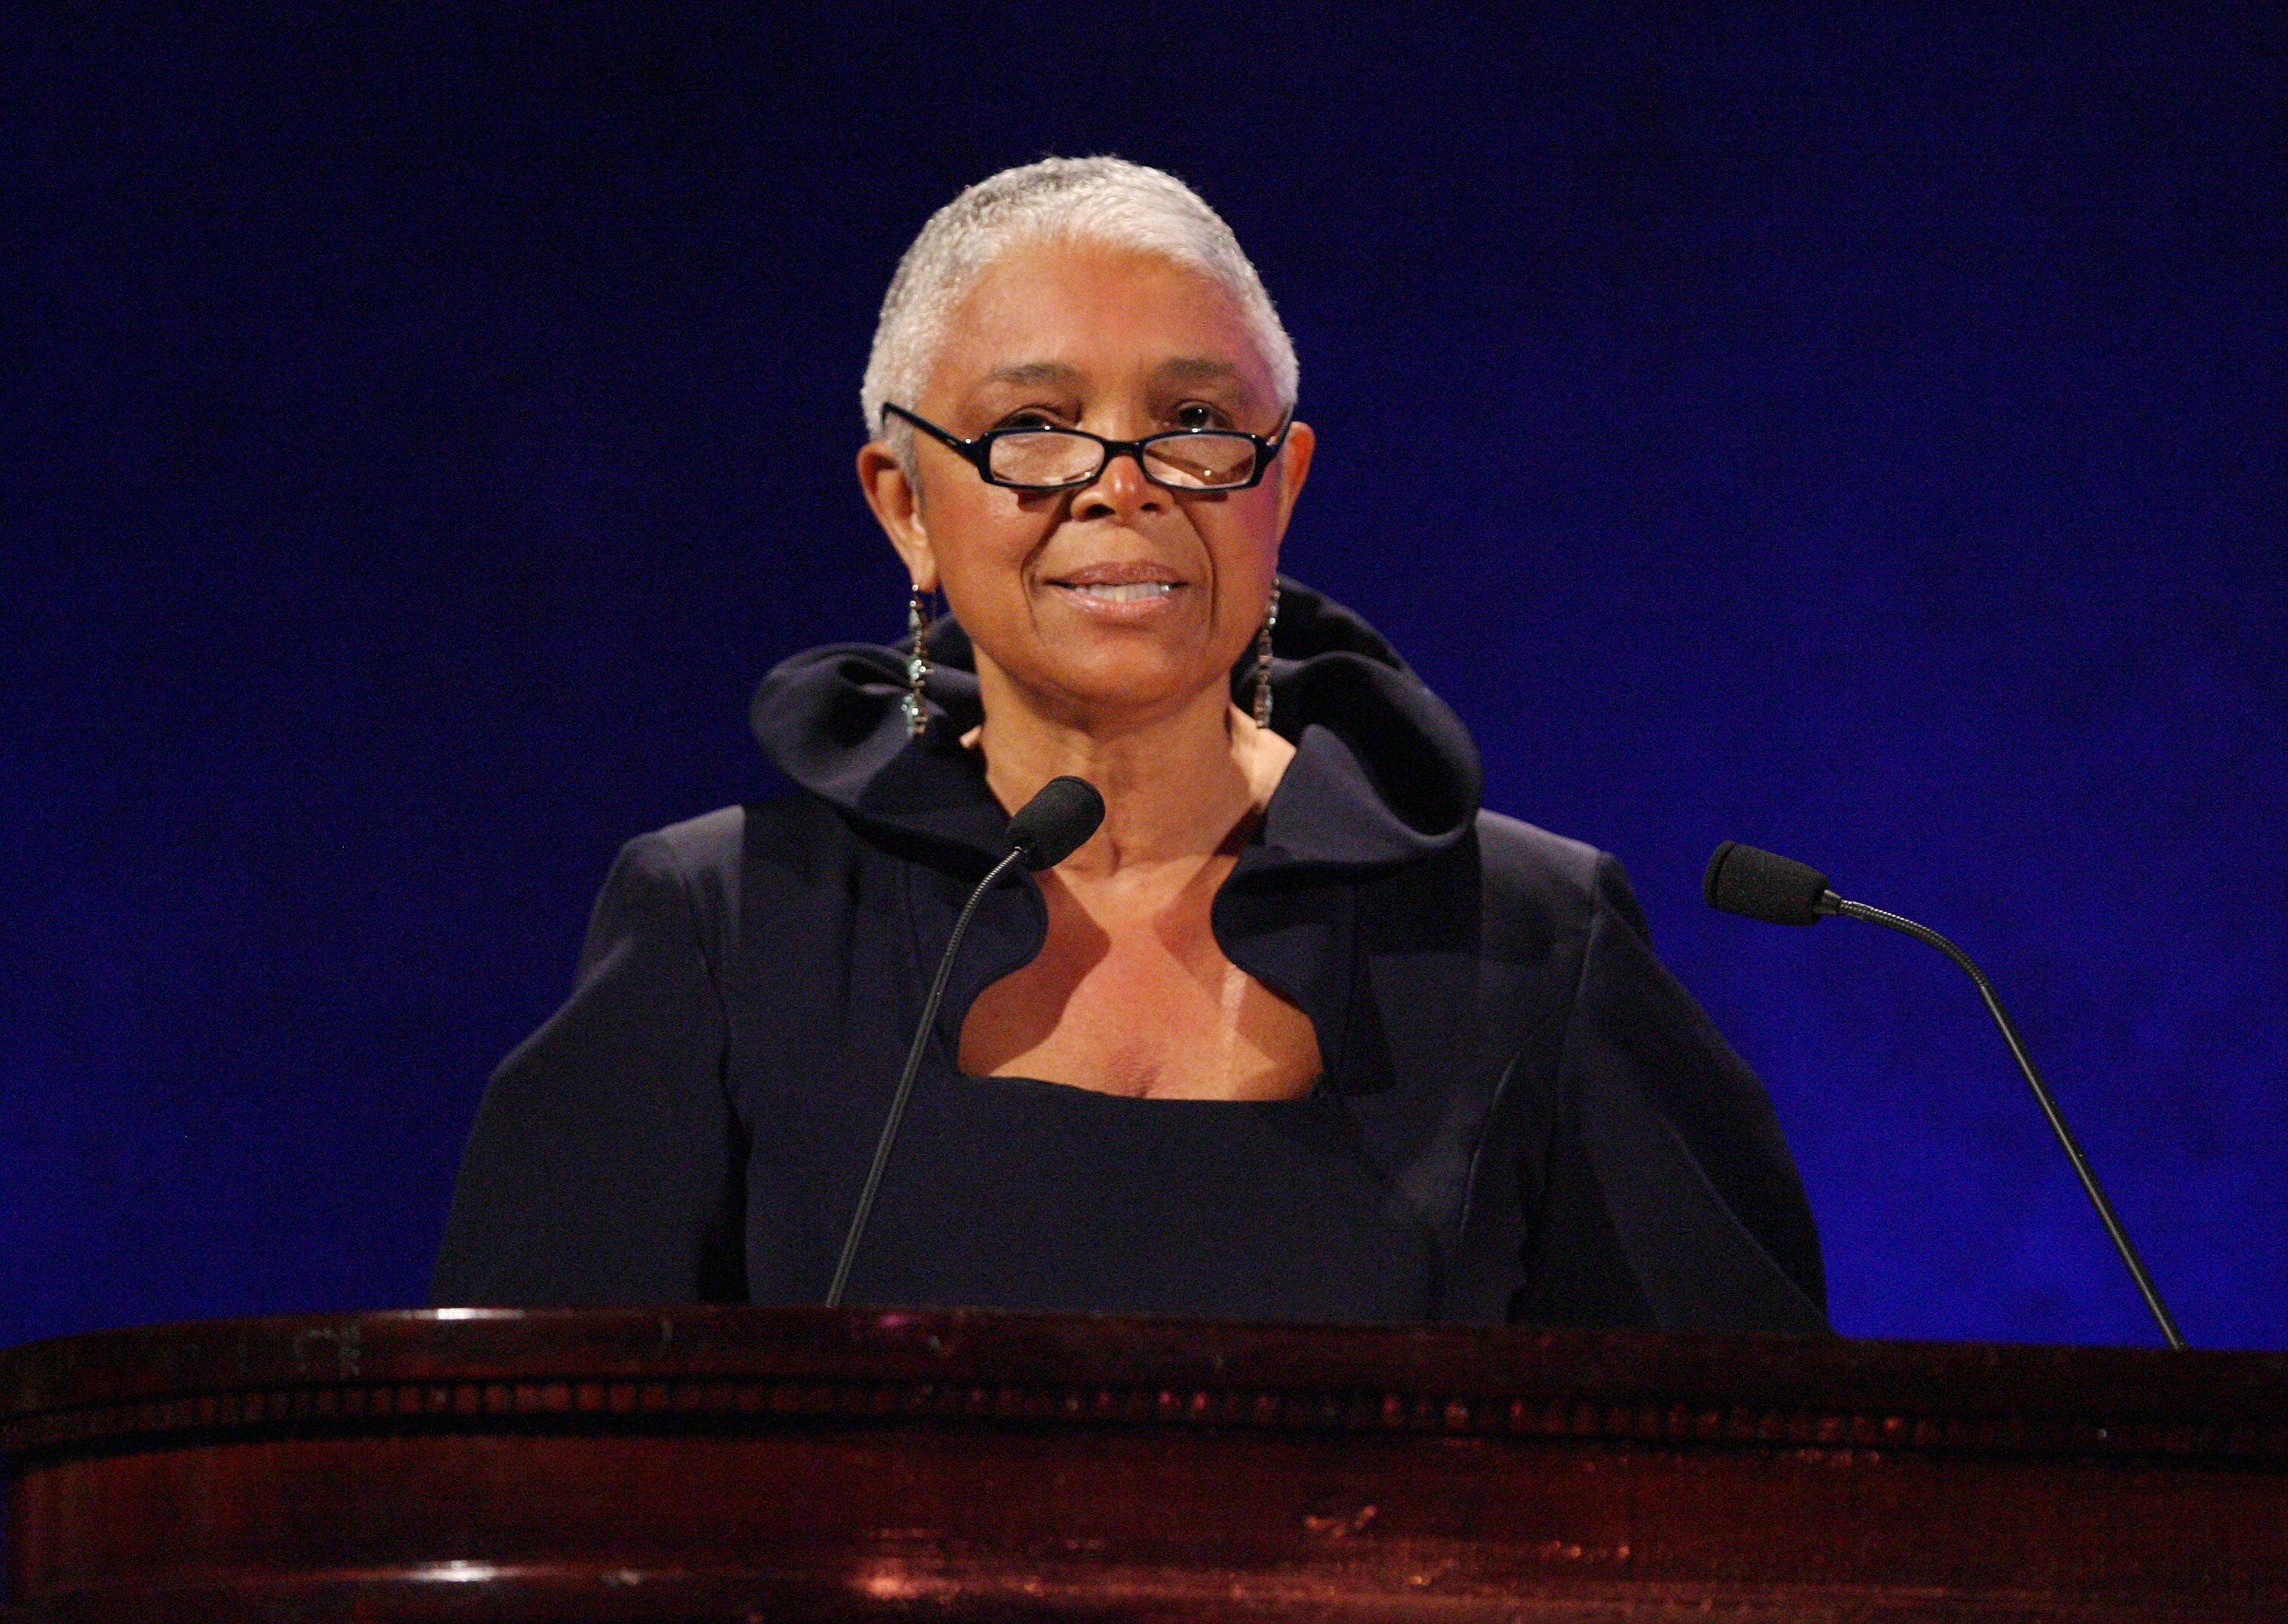 Dr. Camille Cosby speaks on stage at the 35th Anniversary of the Jackie Robinson Foundation hosted by Bill Cosby at the Waldorf Astoria hotel on March 3, 2008 in New York  | Source: Getty Images